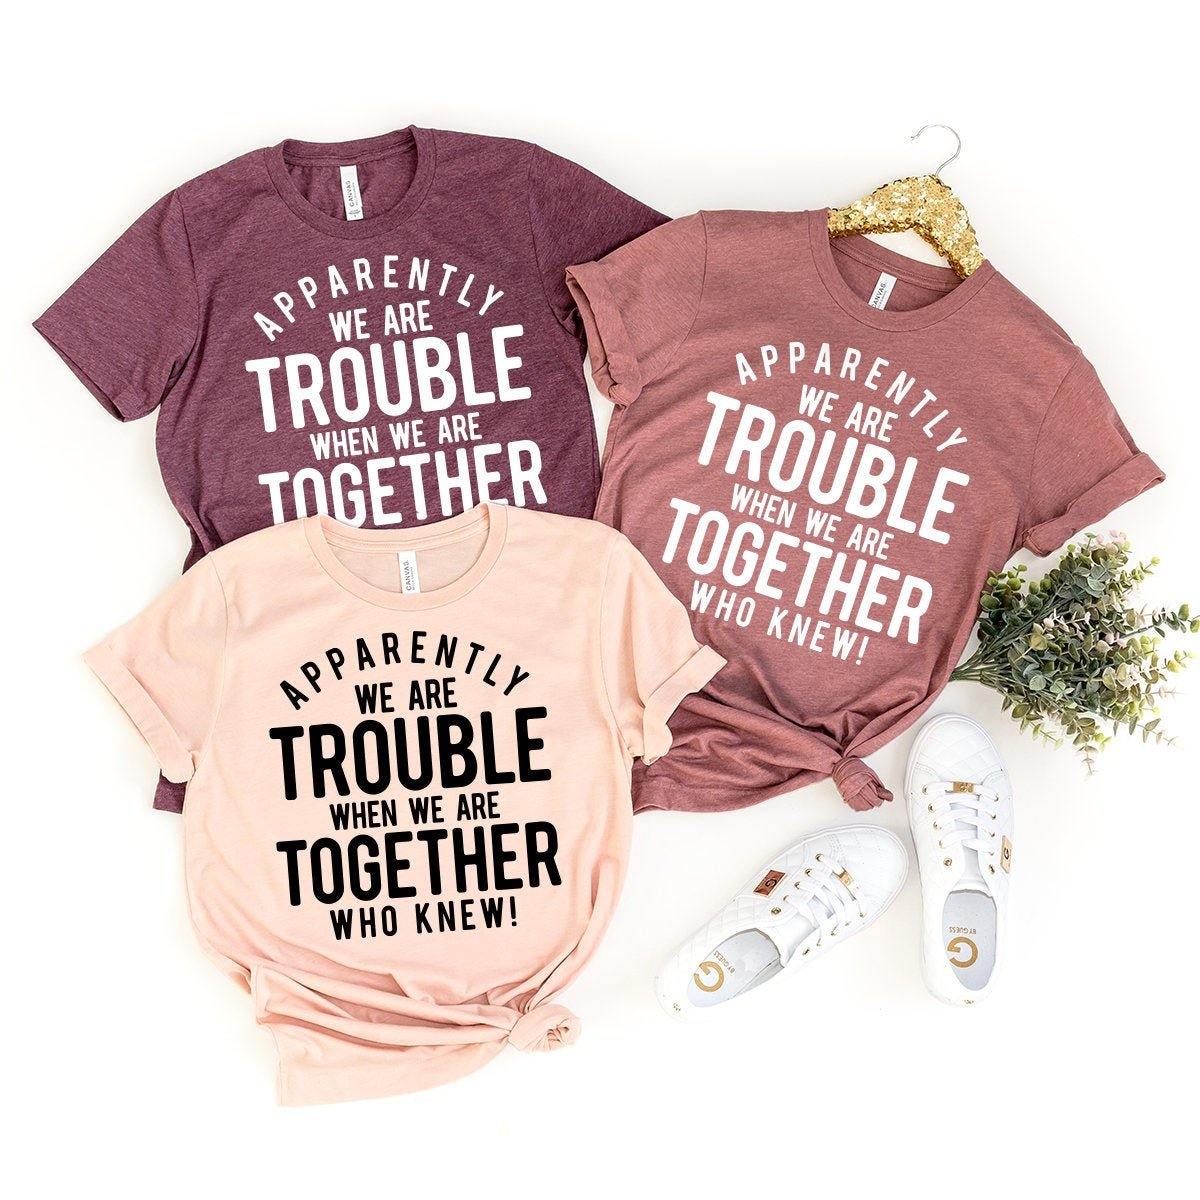 Bestie T-Shirt, Best Friend Gift, Bff Shirts, BFF Birthday Gift, Apparently We Are Trouble When We Are Together Who Knew  Shirt - Fastdeliverytees.com